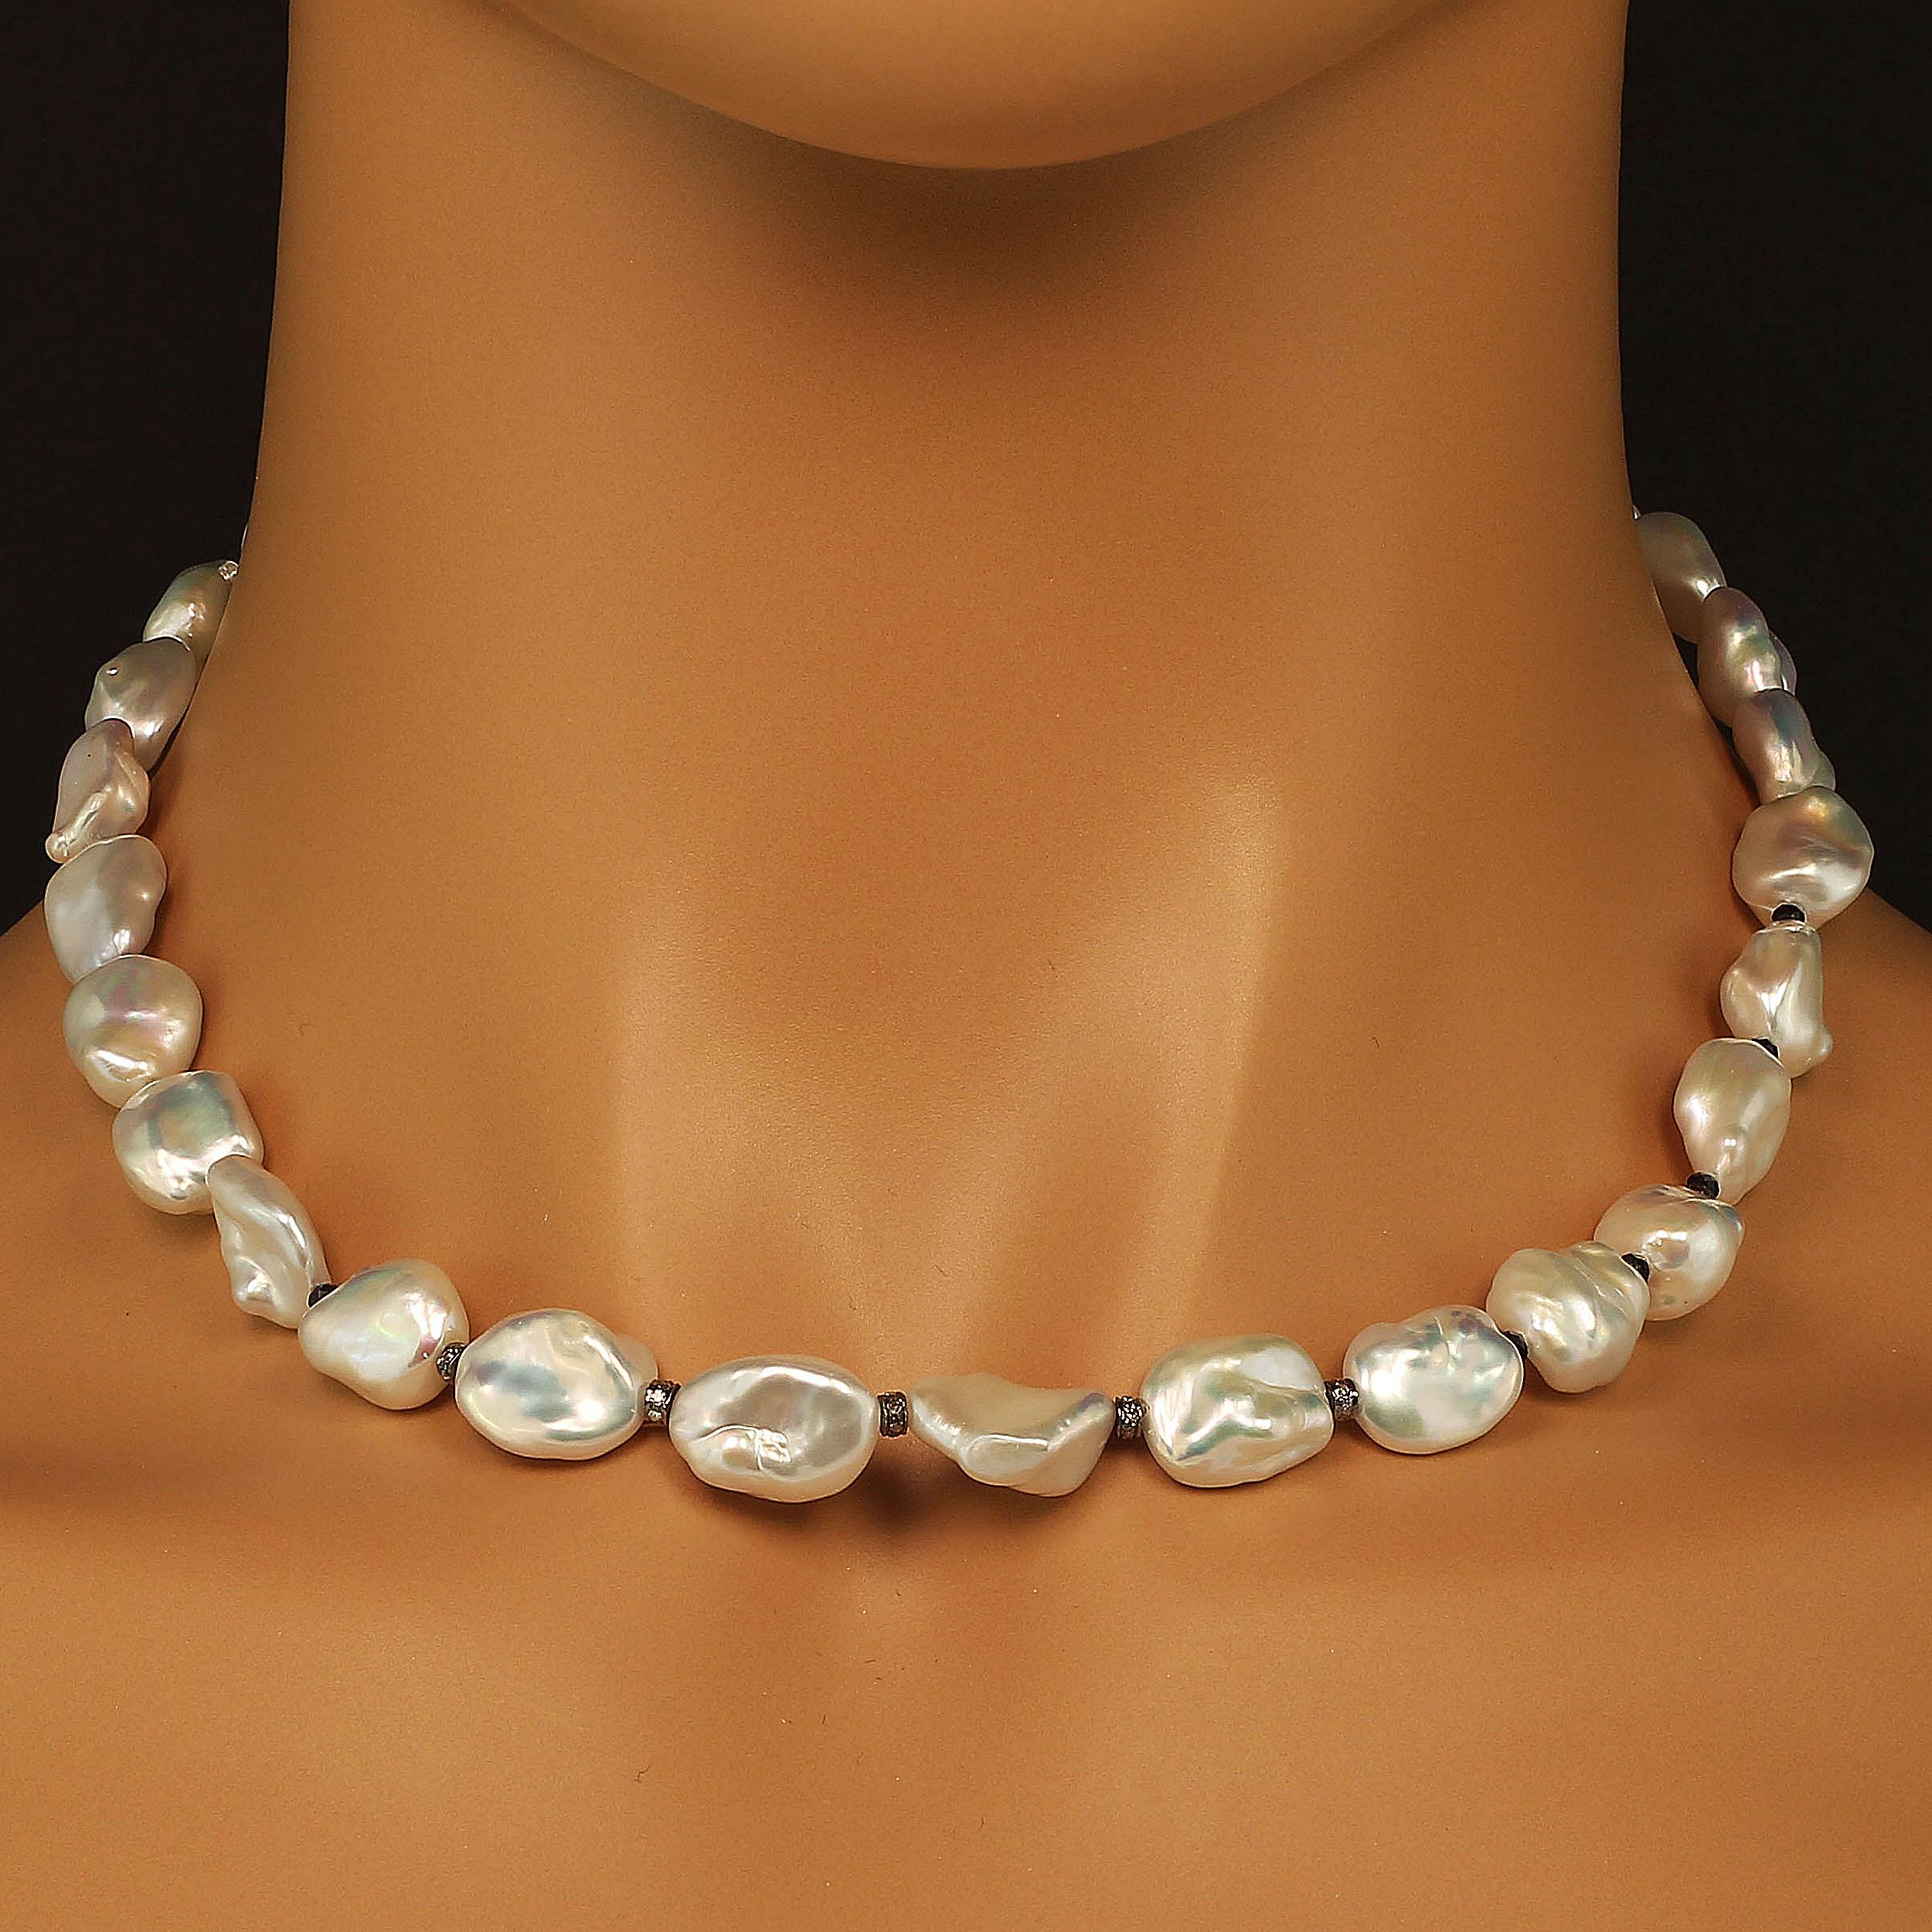 'Because you deserve to own Pearls'

Custom made necklace of silver iridescent Baroque Freshwater Pearls with Diamond accented Rondelles. These gorgeous iridescent pearls flash pinks and yellows and have a wonderful luster.  These pearls are from a